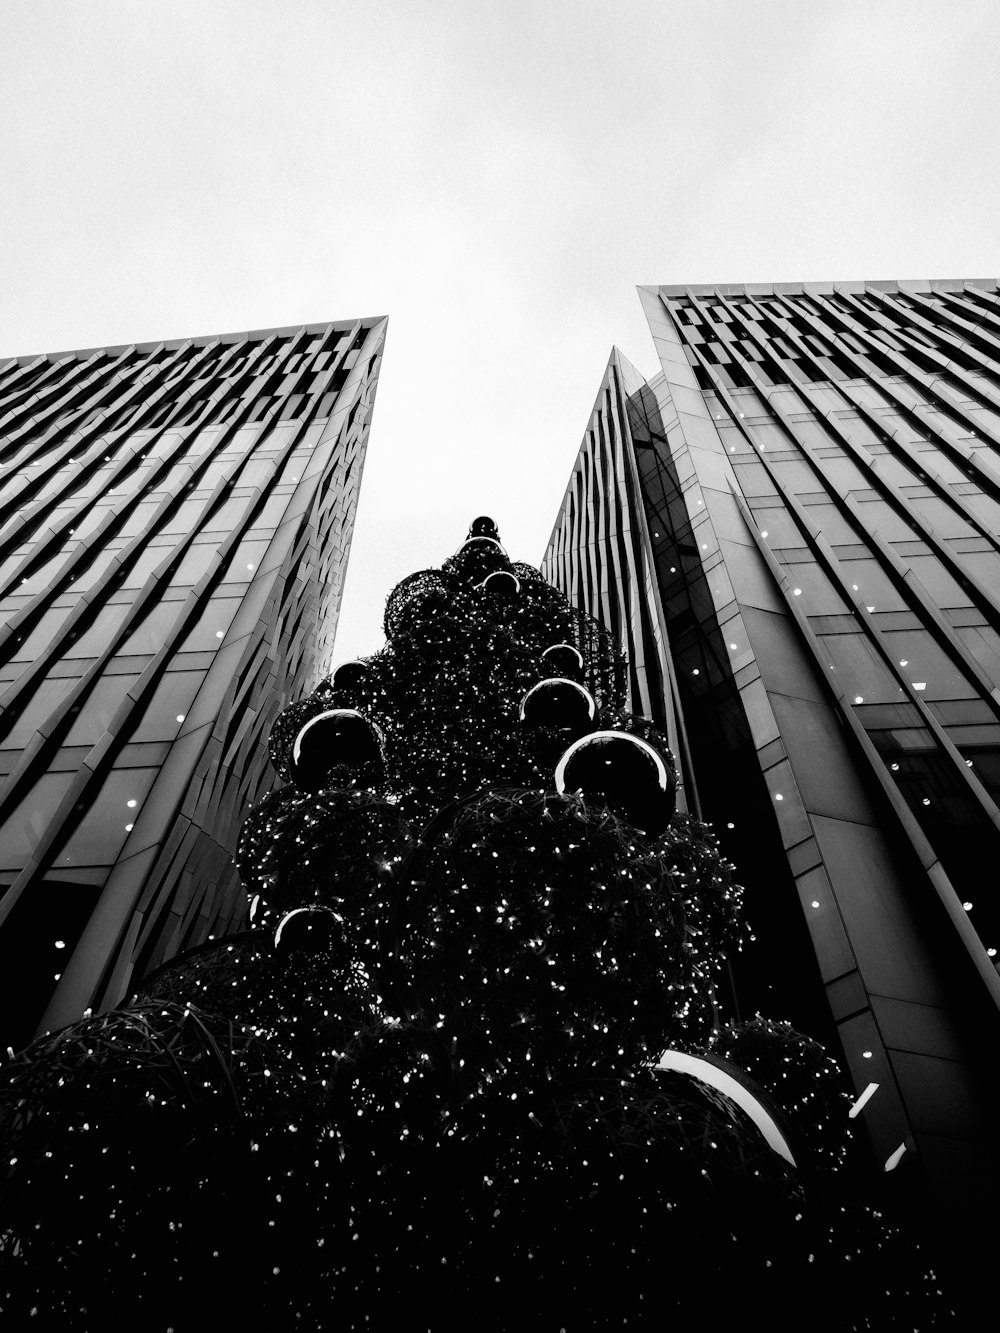 a tree in front of a group of tall buildings